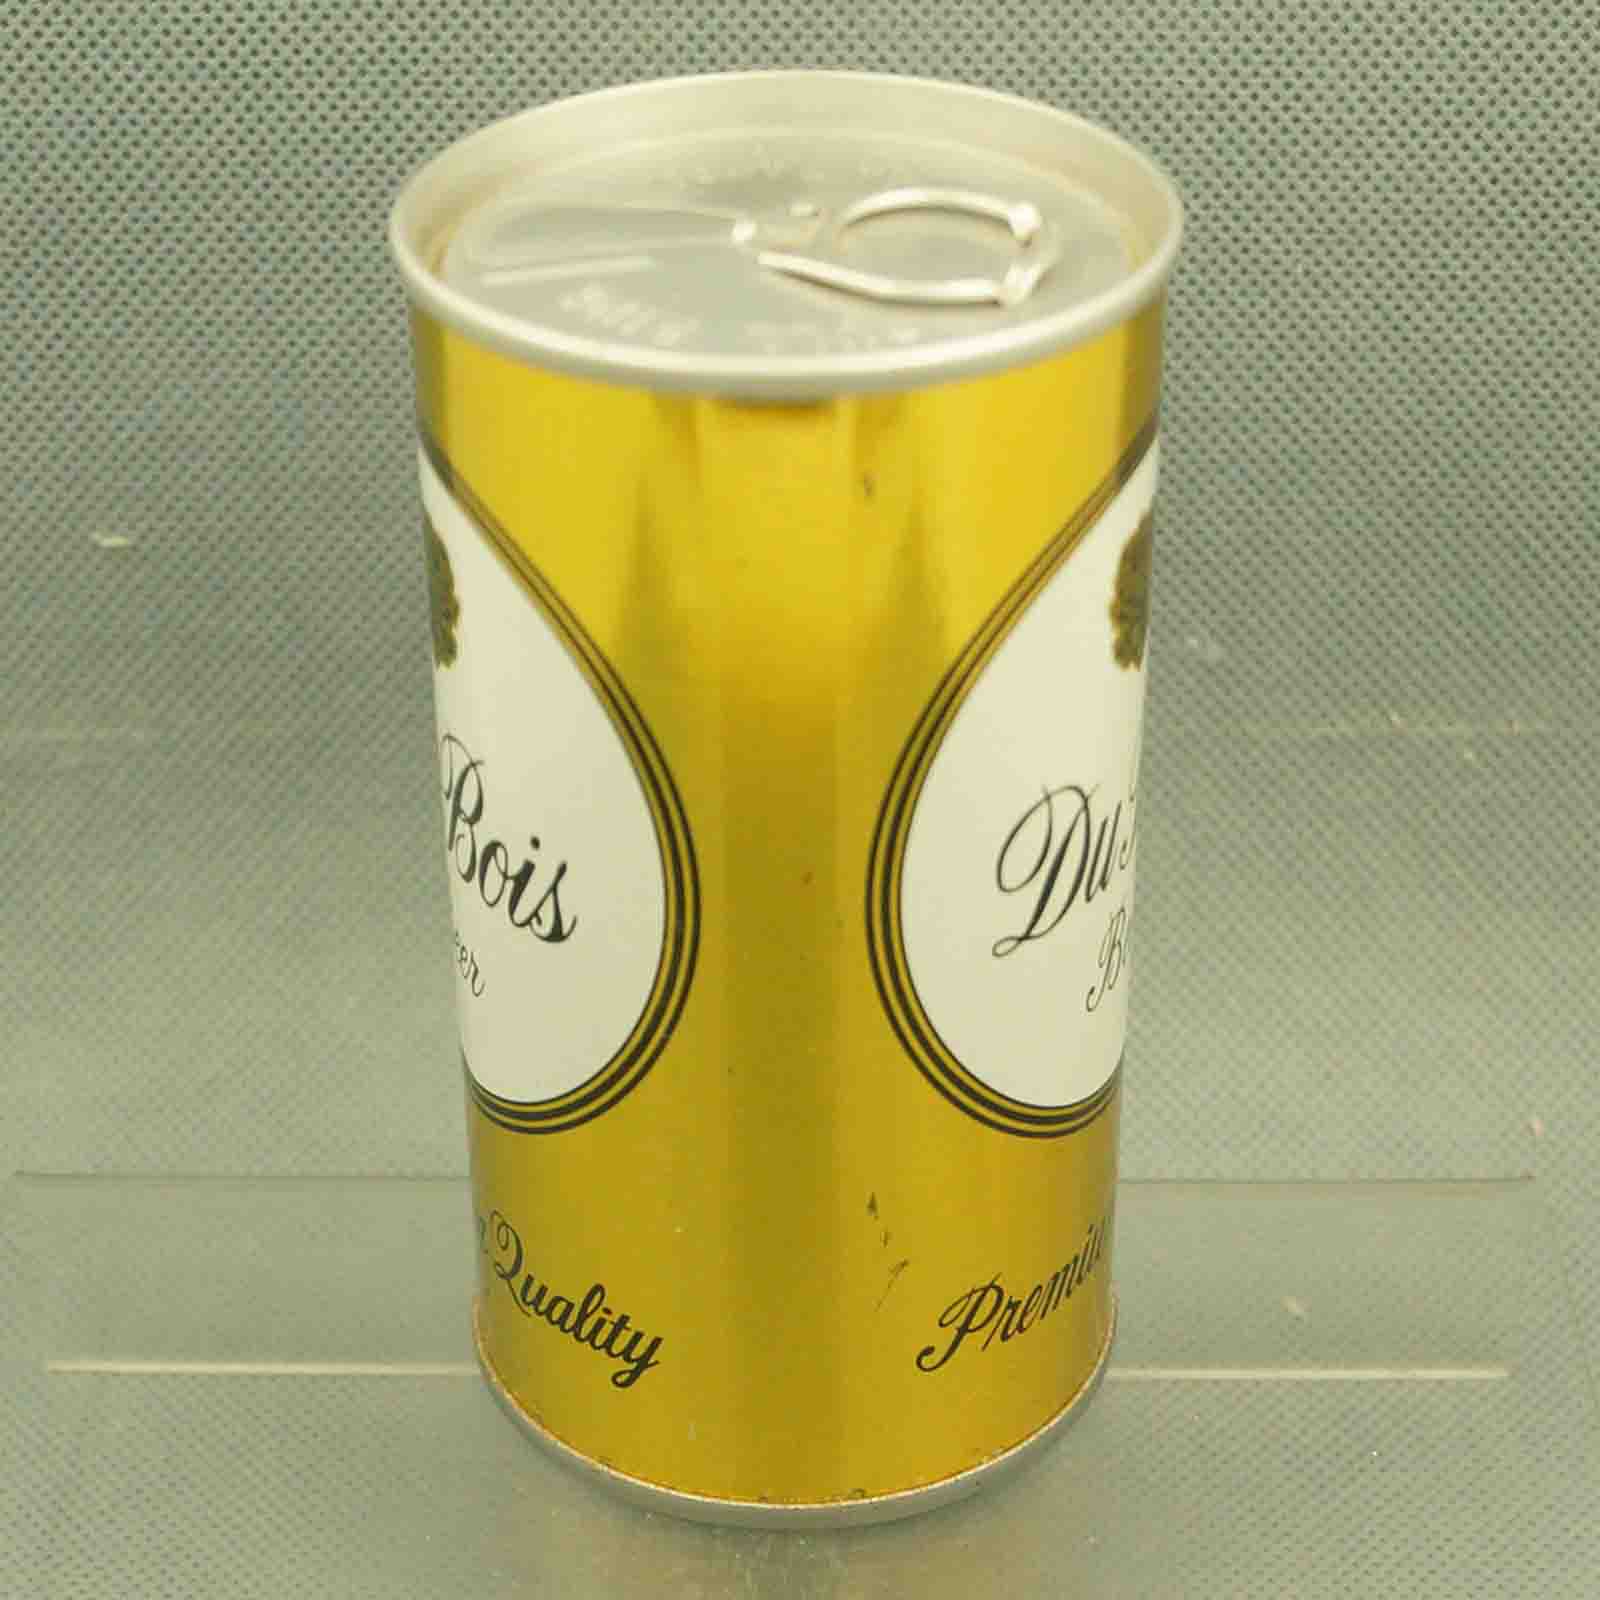 dubois 60-7 pull tab beer can 2